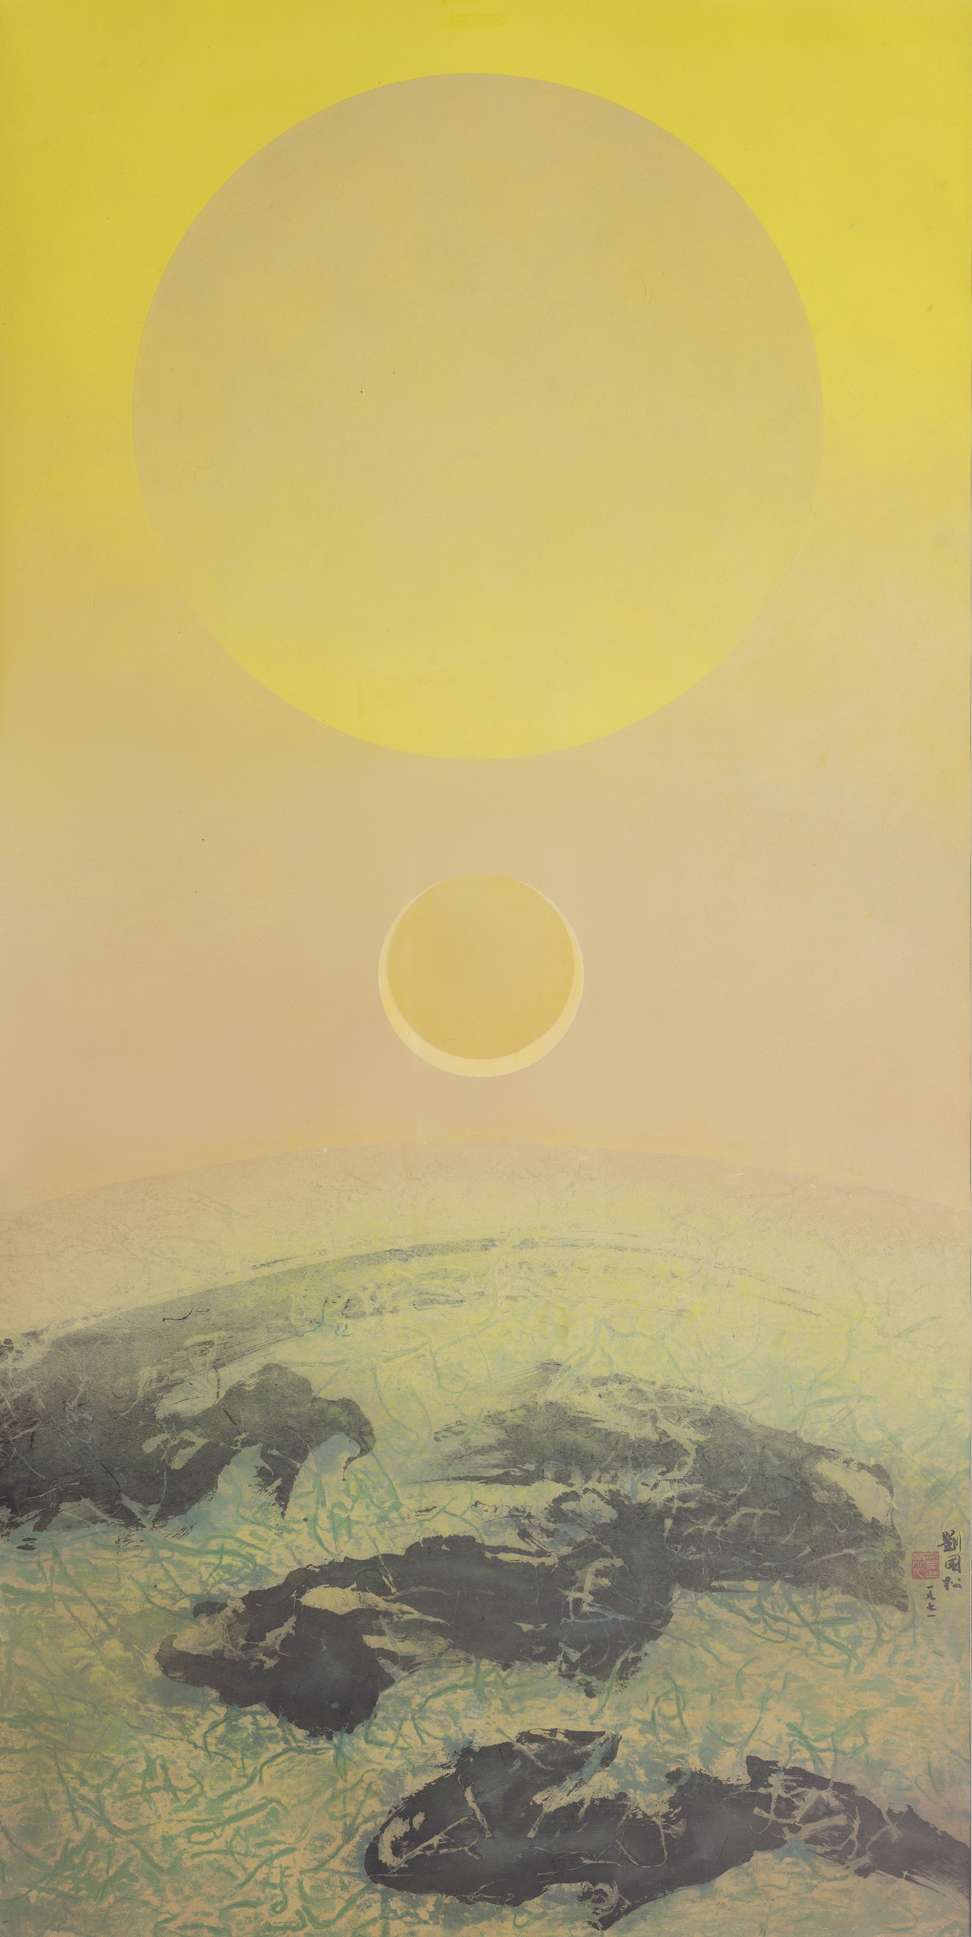 The Composition of Distance No. 18 (1971), by Liu Kuo-sung, one of the works in the MGM Cotai Chairman's Collection. Photo: Handout